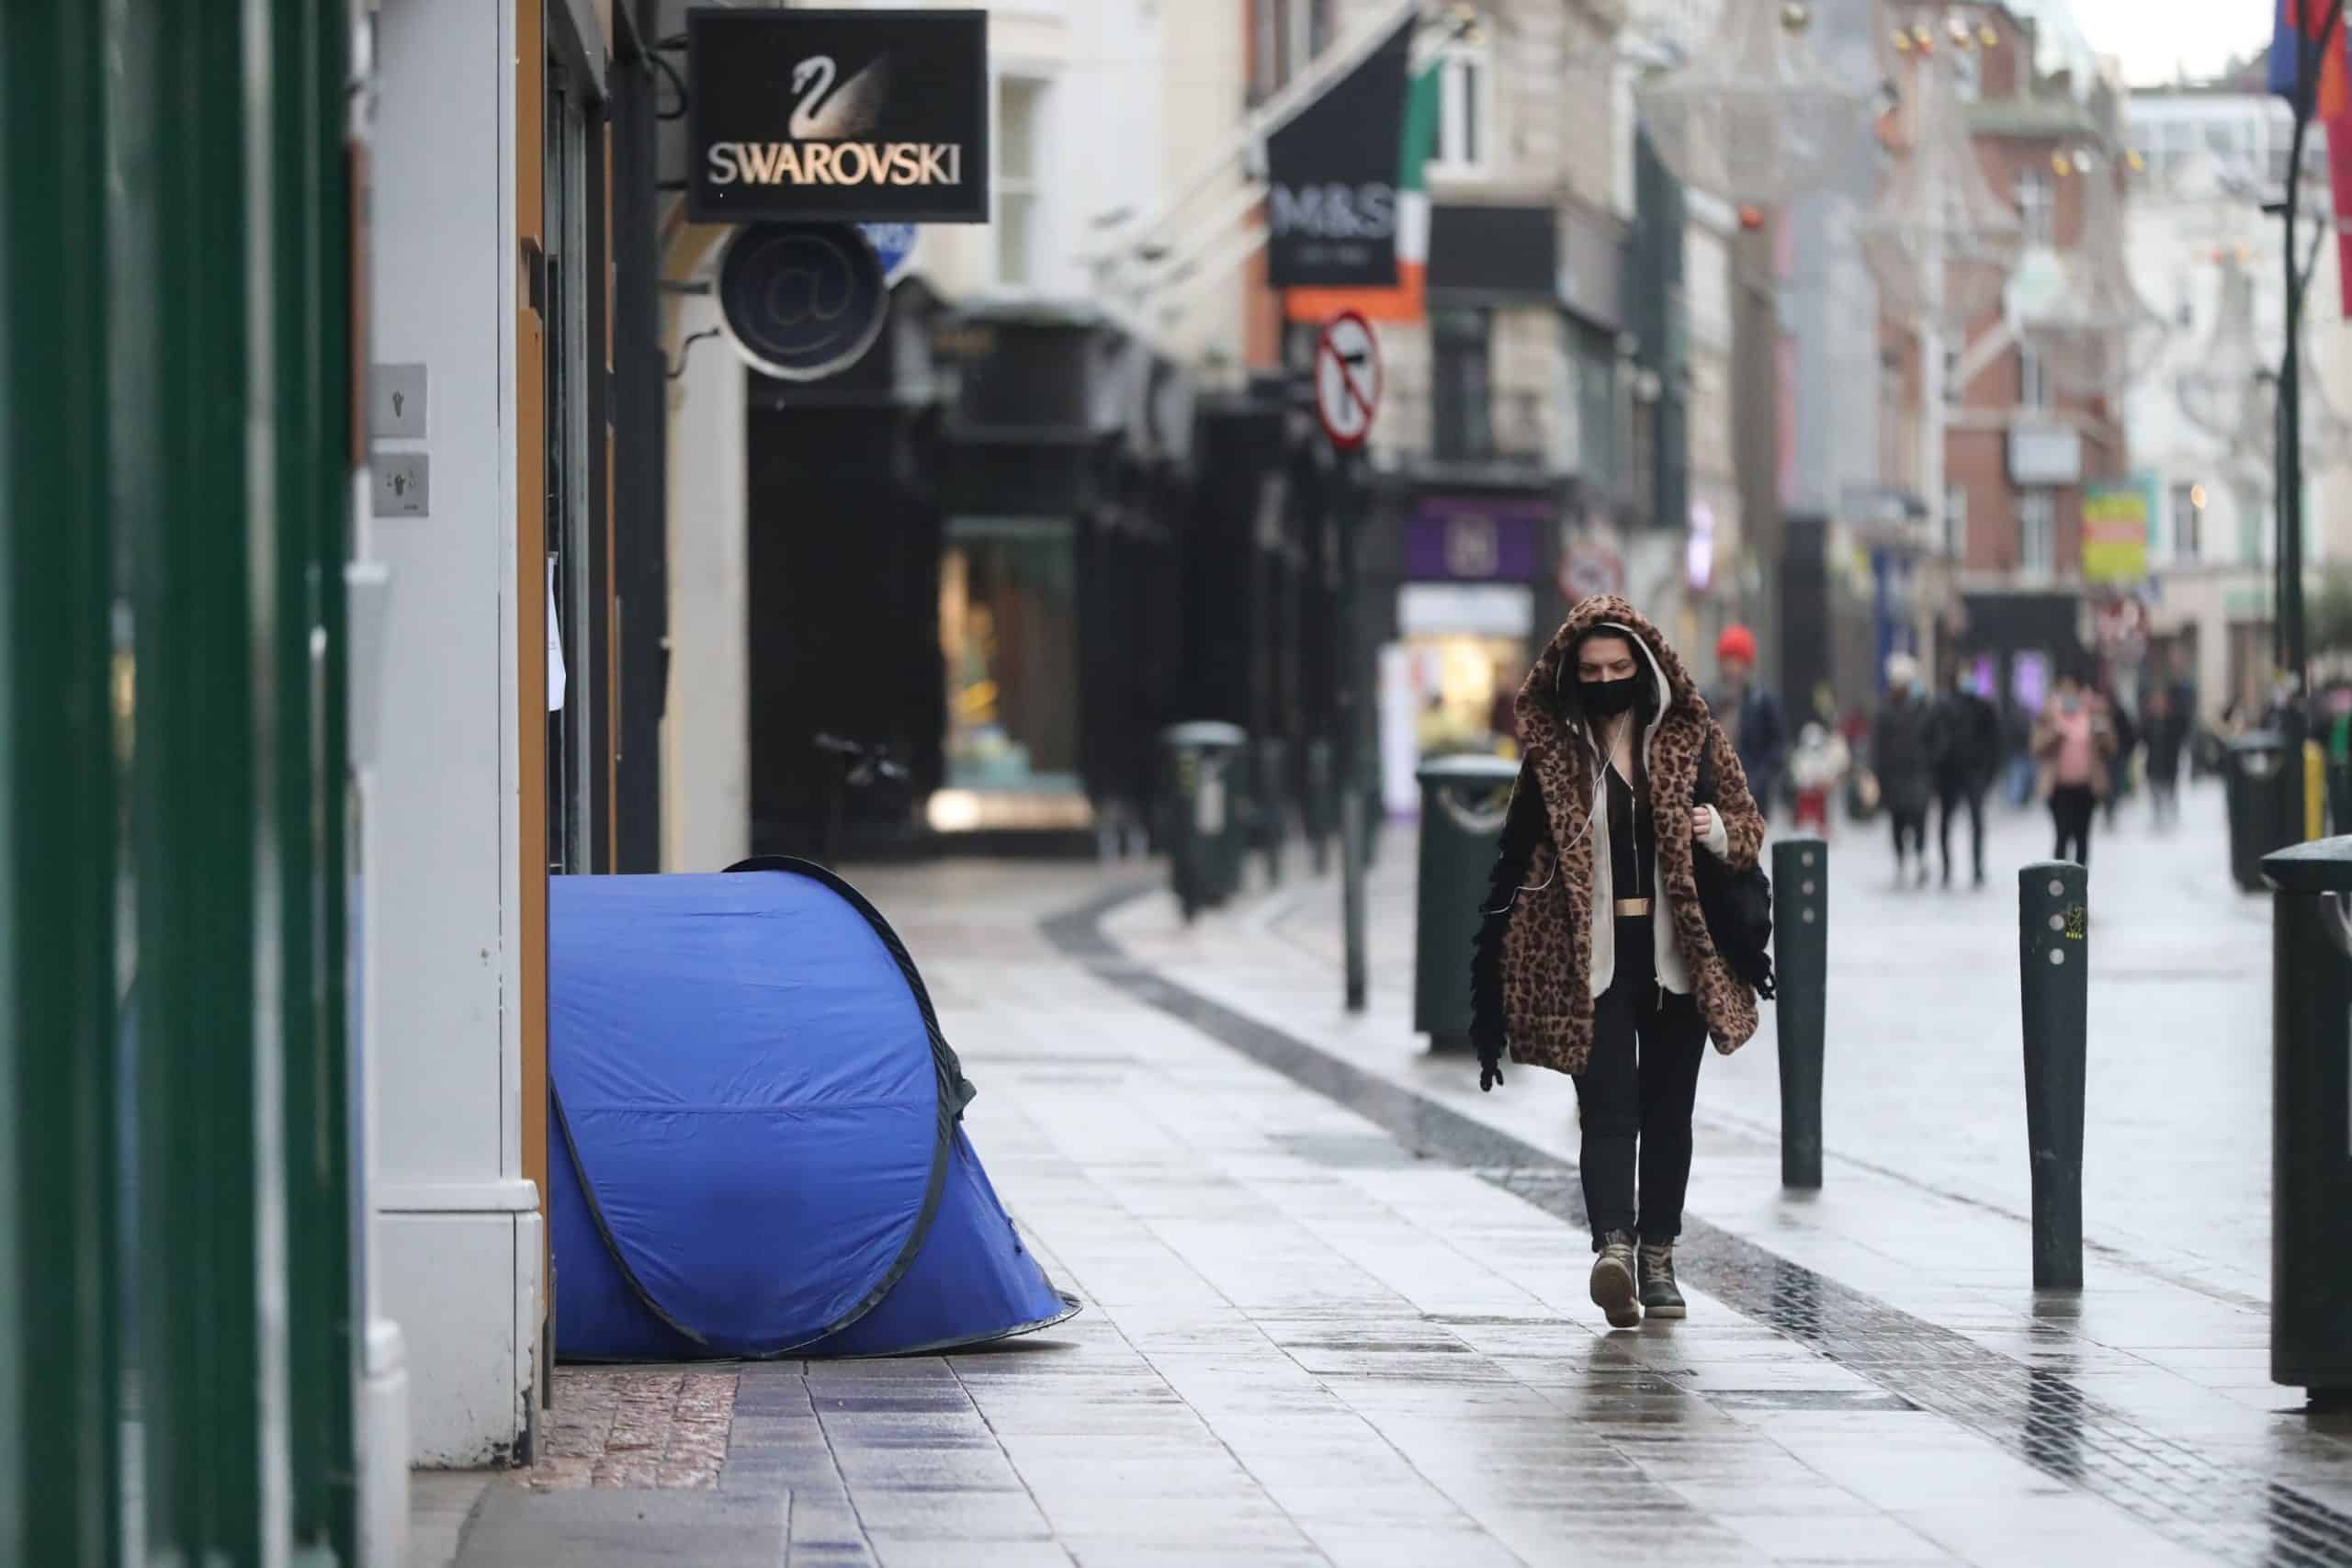 Homeless deaths surge by 80% in two years, with Tory cuts blamed